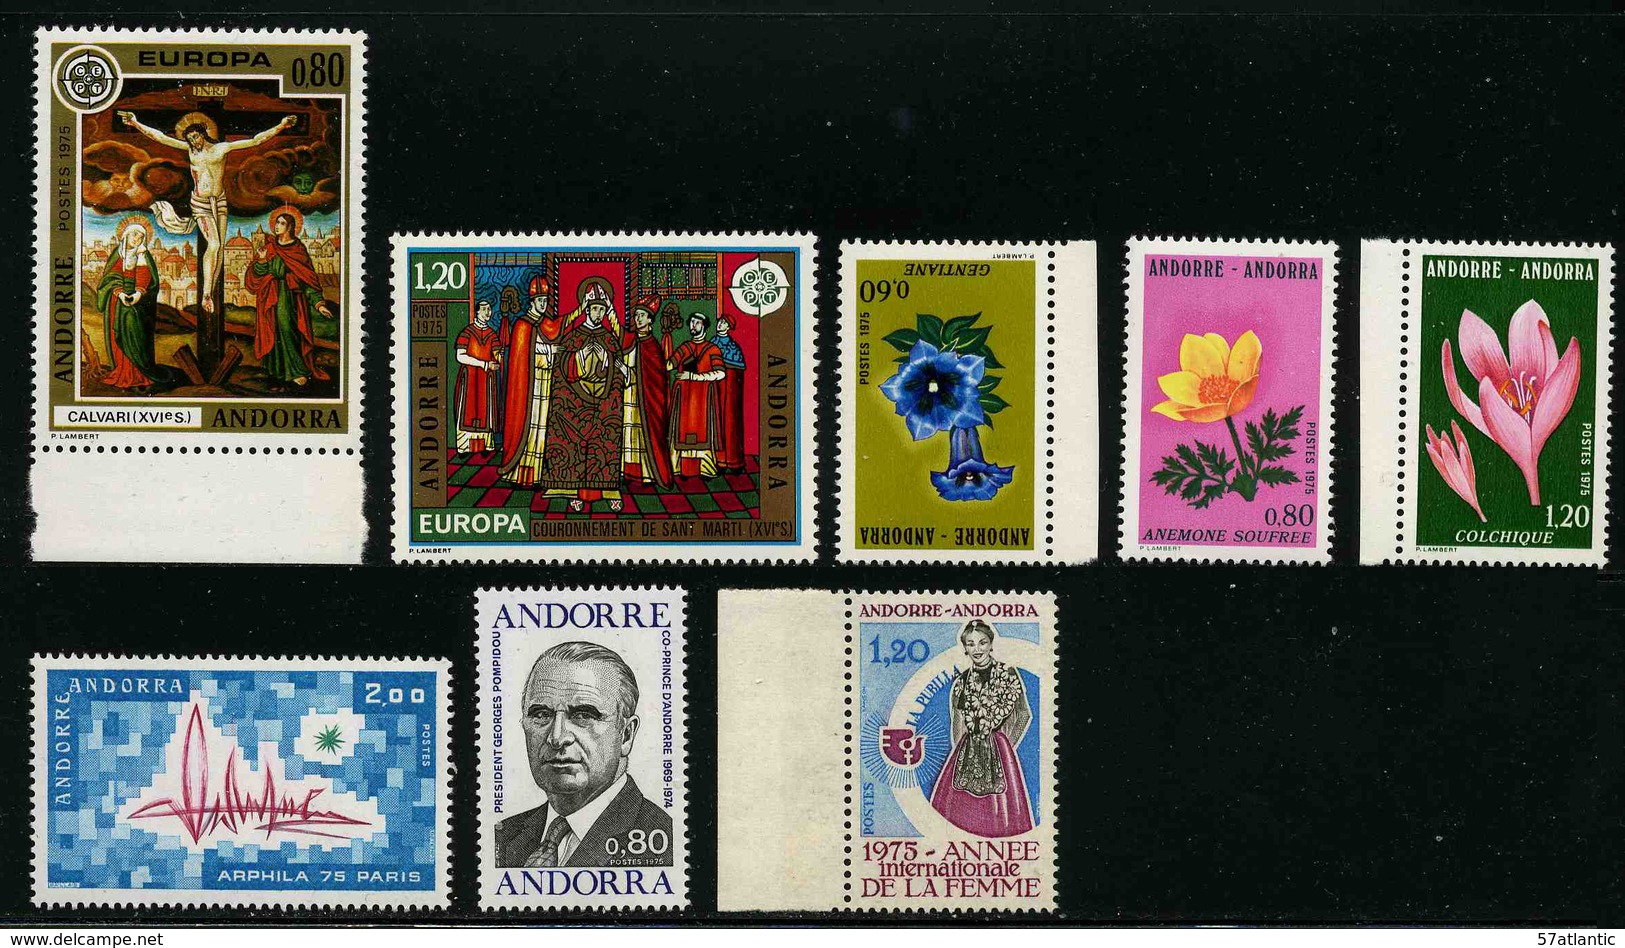 ANDORRE FRANCAIS - ANNEE COMPLETE 1975 - YT 243 à 250 ** -  TIMBRES NEUFS ** - Volledige Jaargang